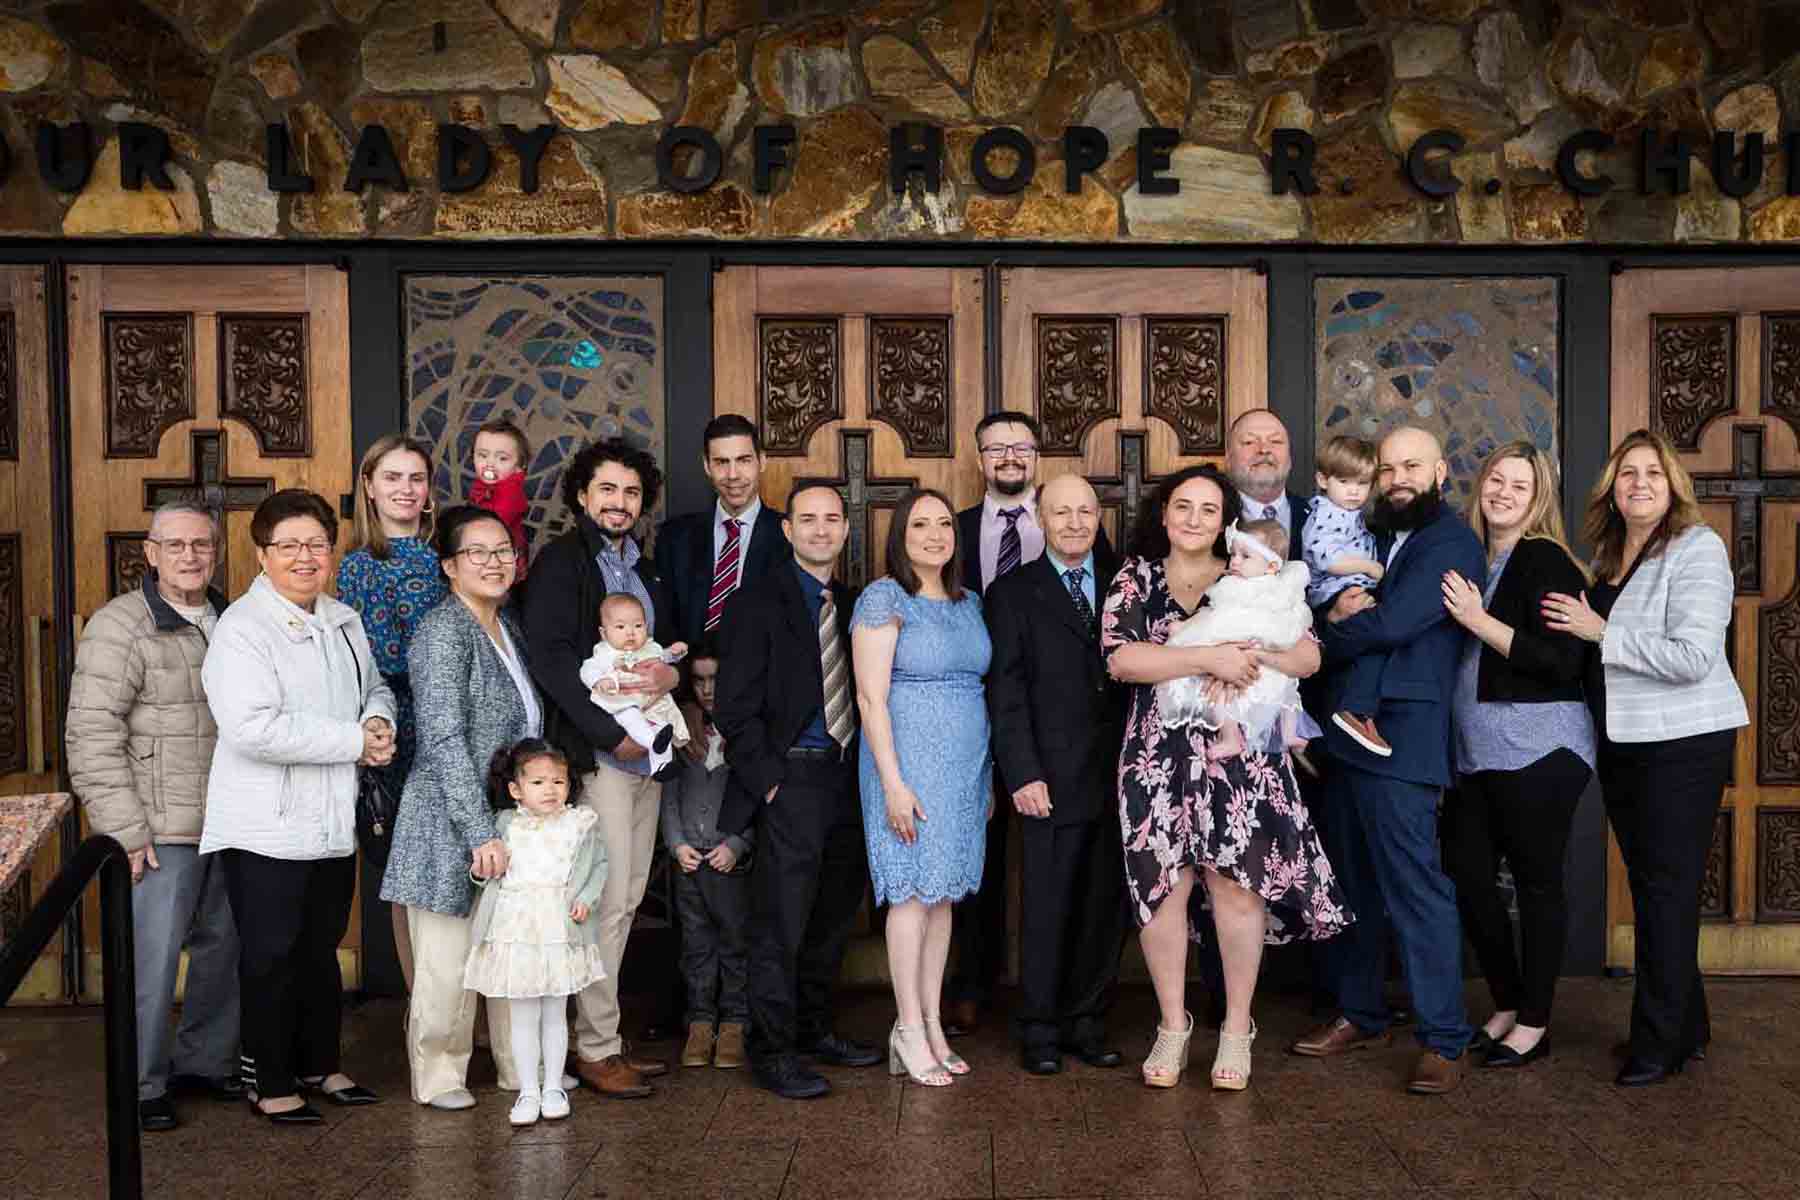 Maspeth baptism photos of large family in front of Our Lady of Hope Roman Catholic Church